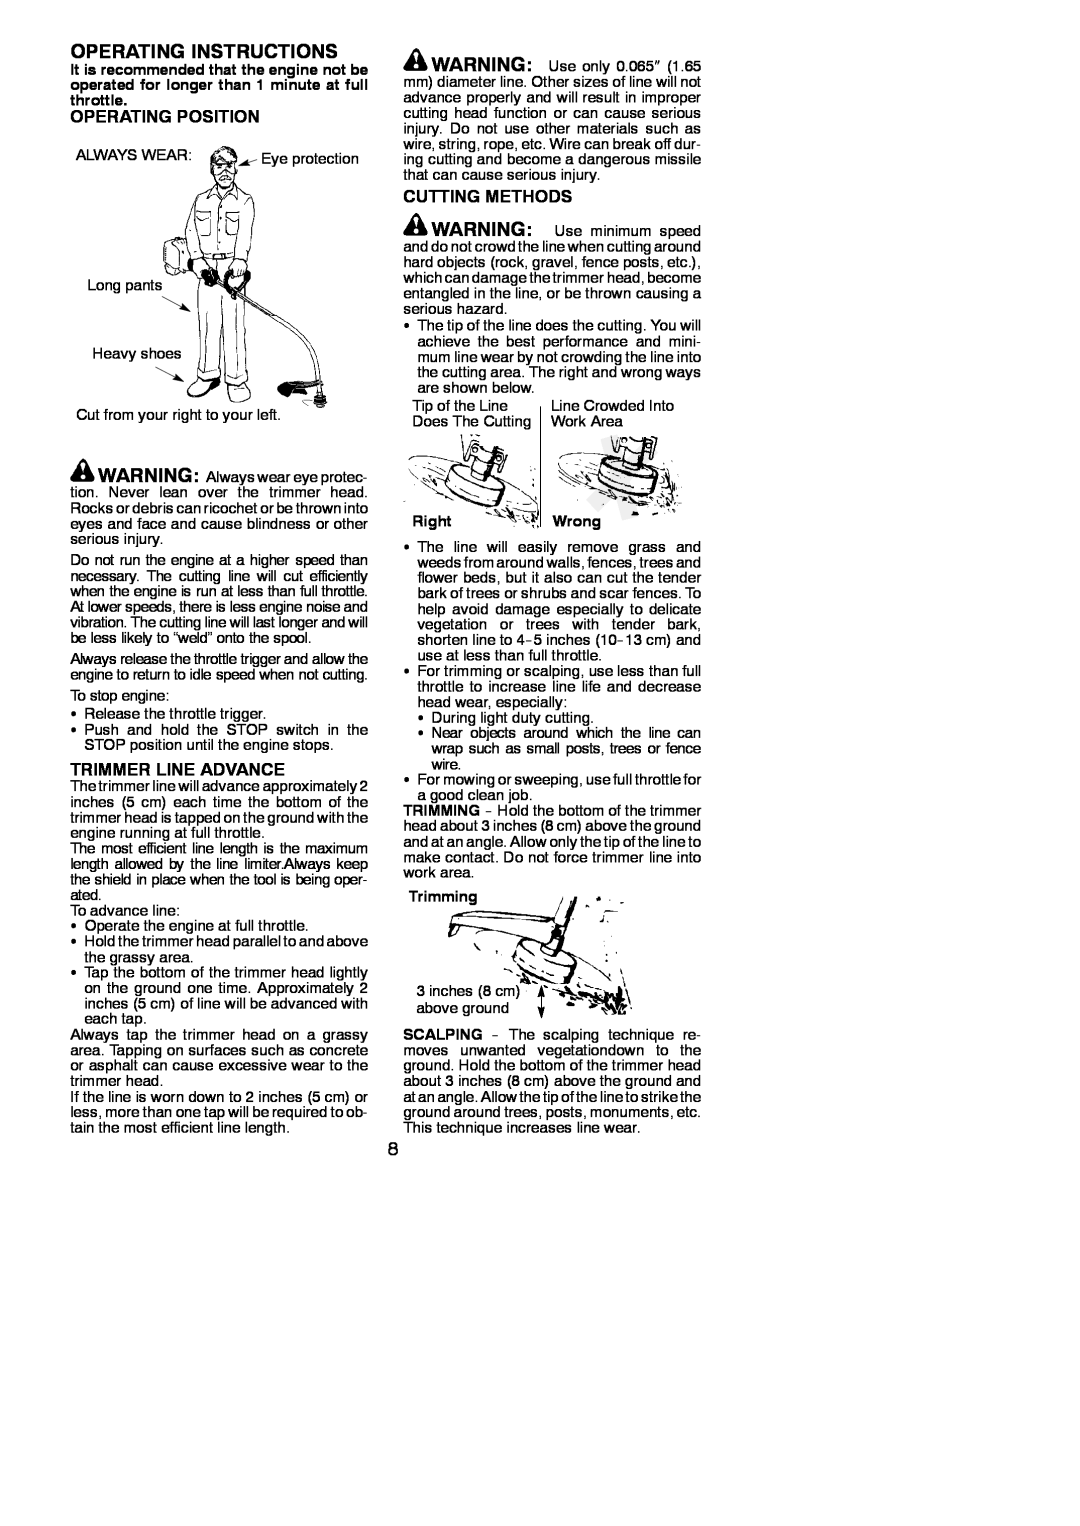 Weed Eater 952711929 Operating Instructions, Operating Position, Trimmer Line Advance, Cutting Methods, RightWrong 